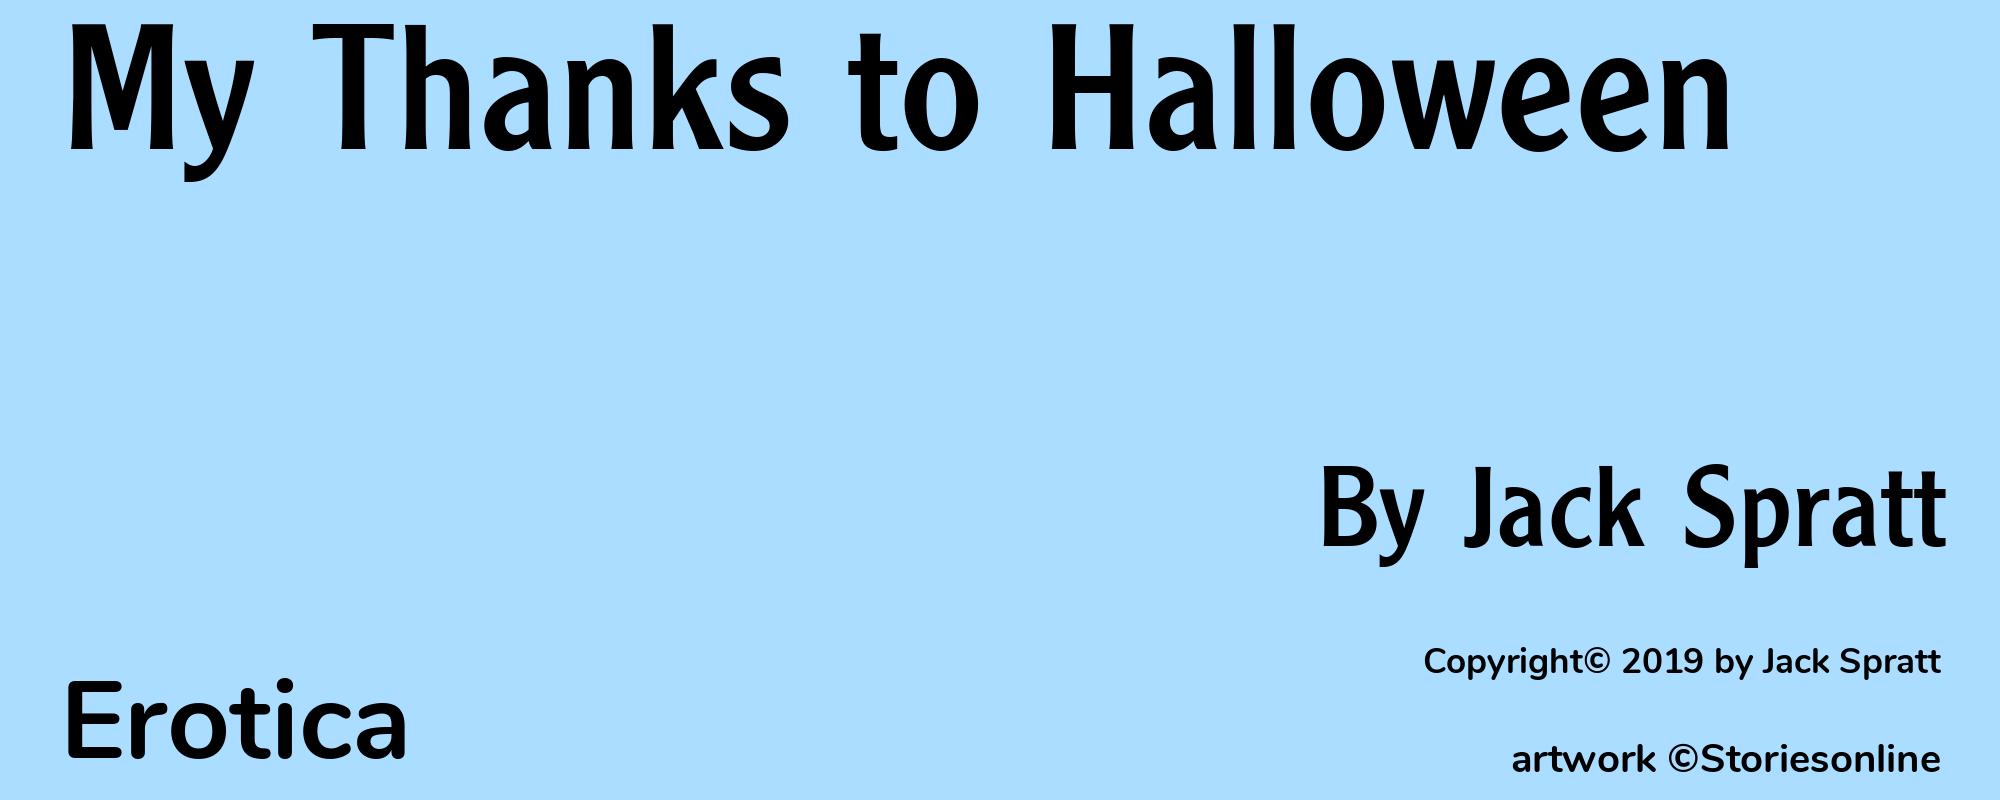 My Thanks to Halloween - Cover